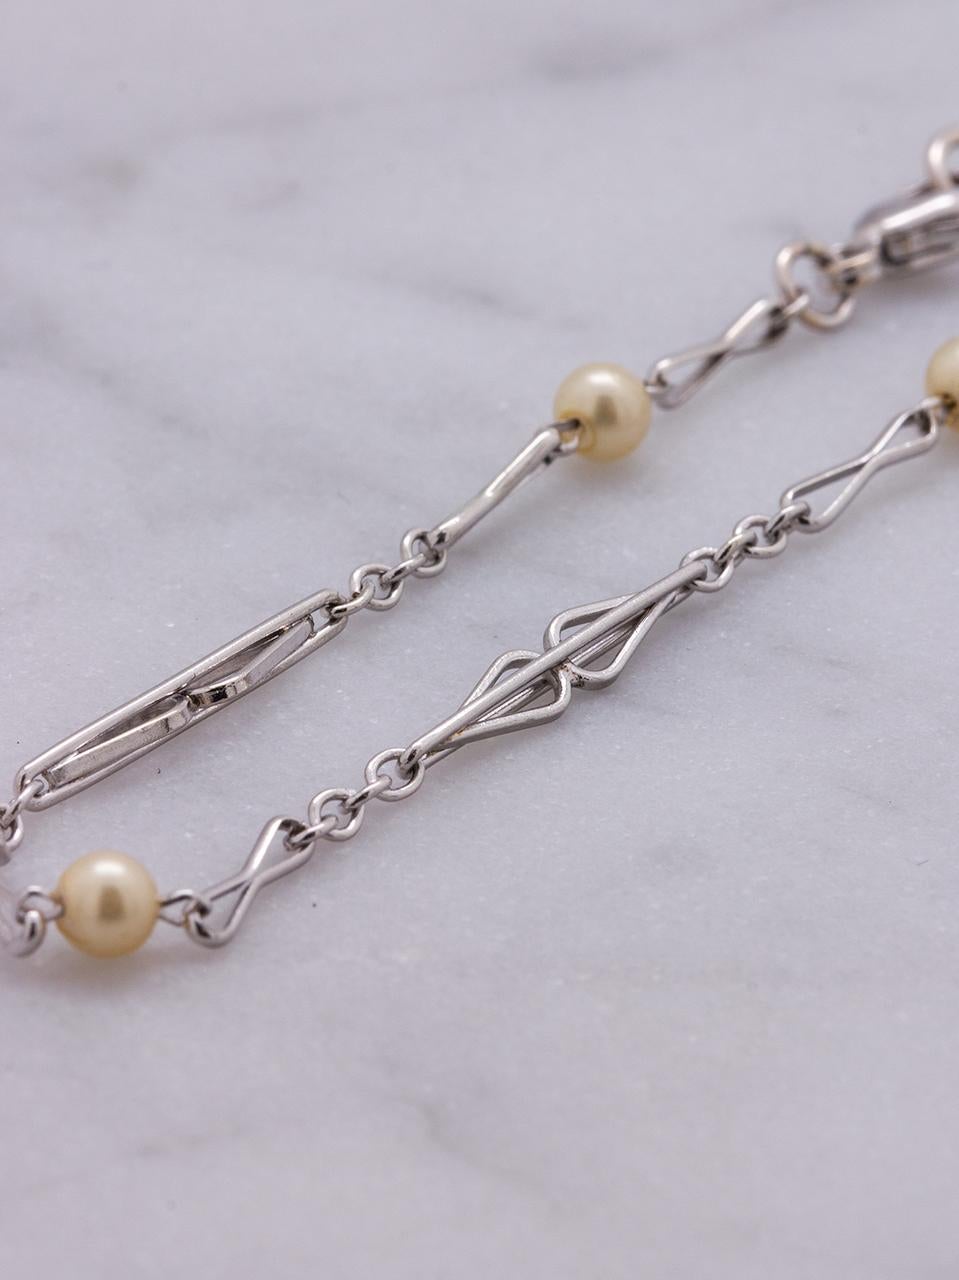 This dainty, feminine antique chain bracelet features four x 3mm off-white round pearls and elongated chain link is beautiful worn alone or layerd with other bracelets or even a wristwatch. The bracelet measures approximately 3mm wide and is secured